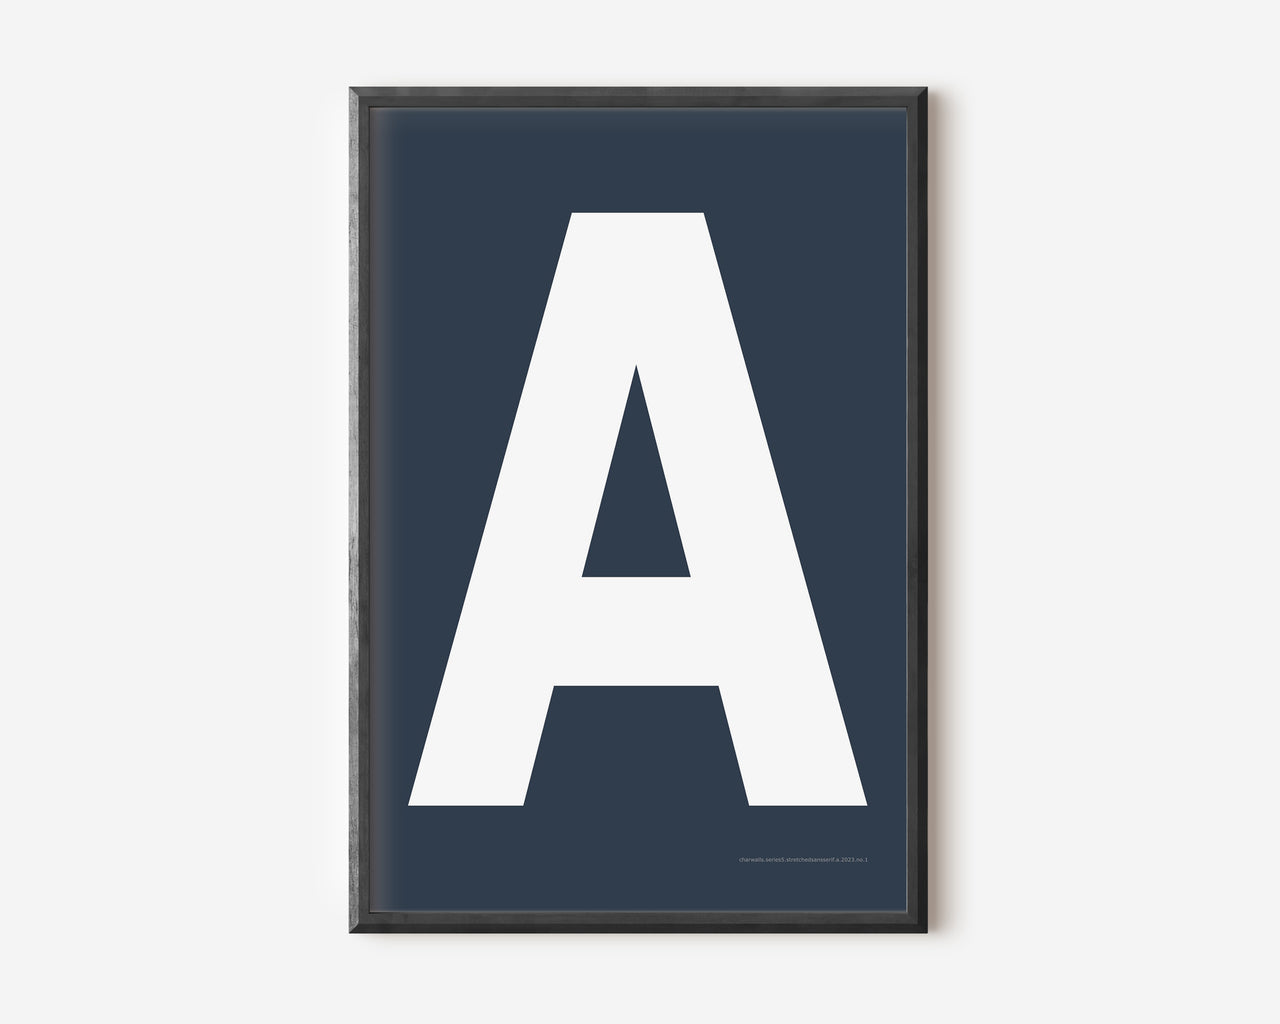 Modern art print with an uppercase white letter A on a navy blue background.